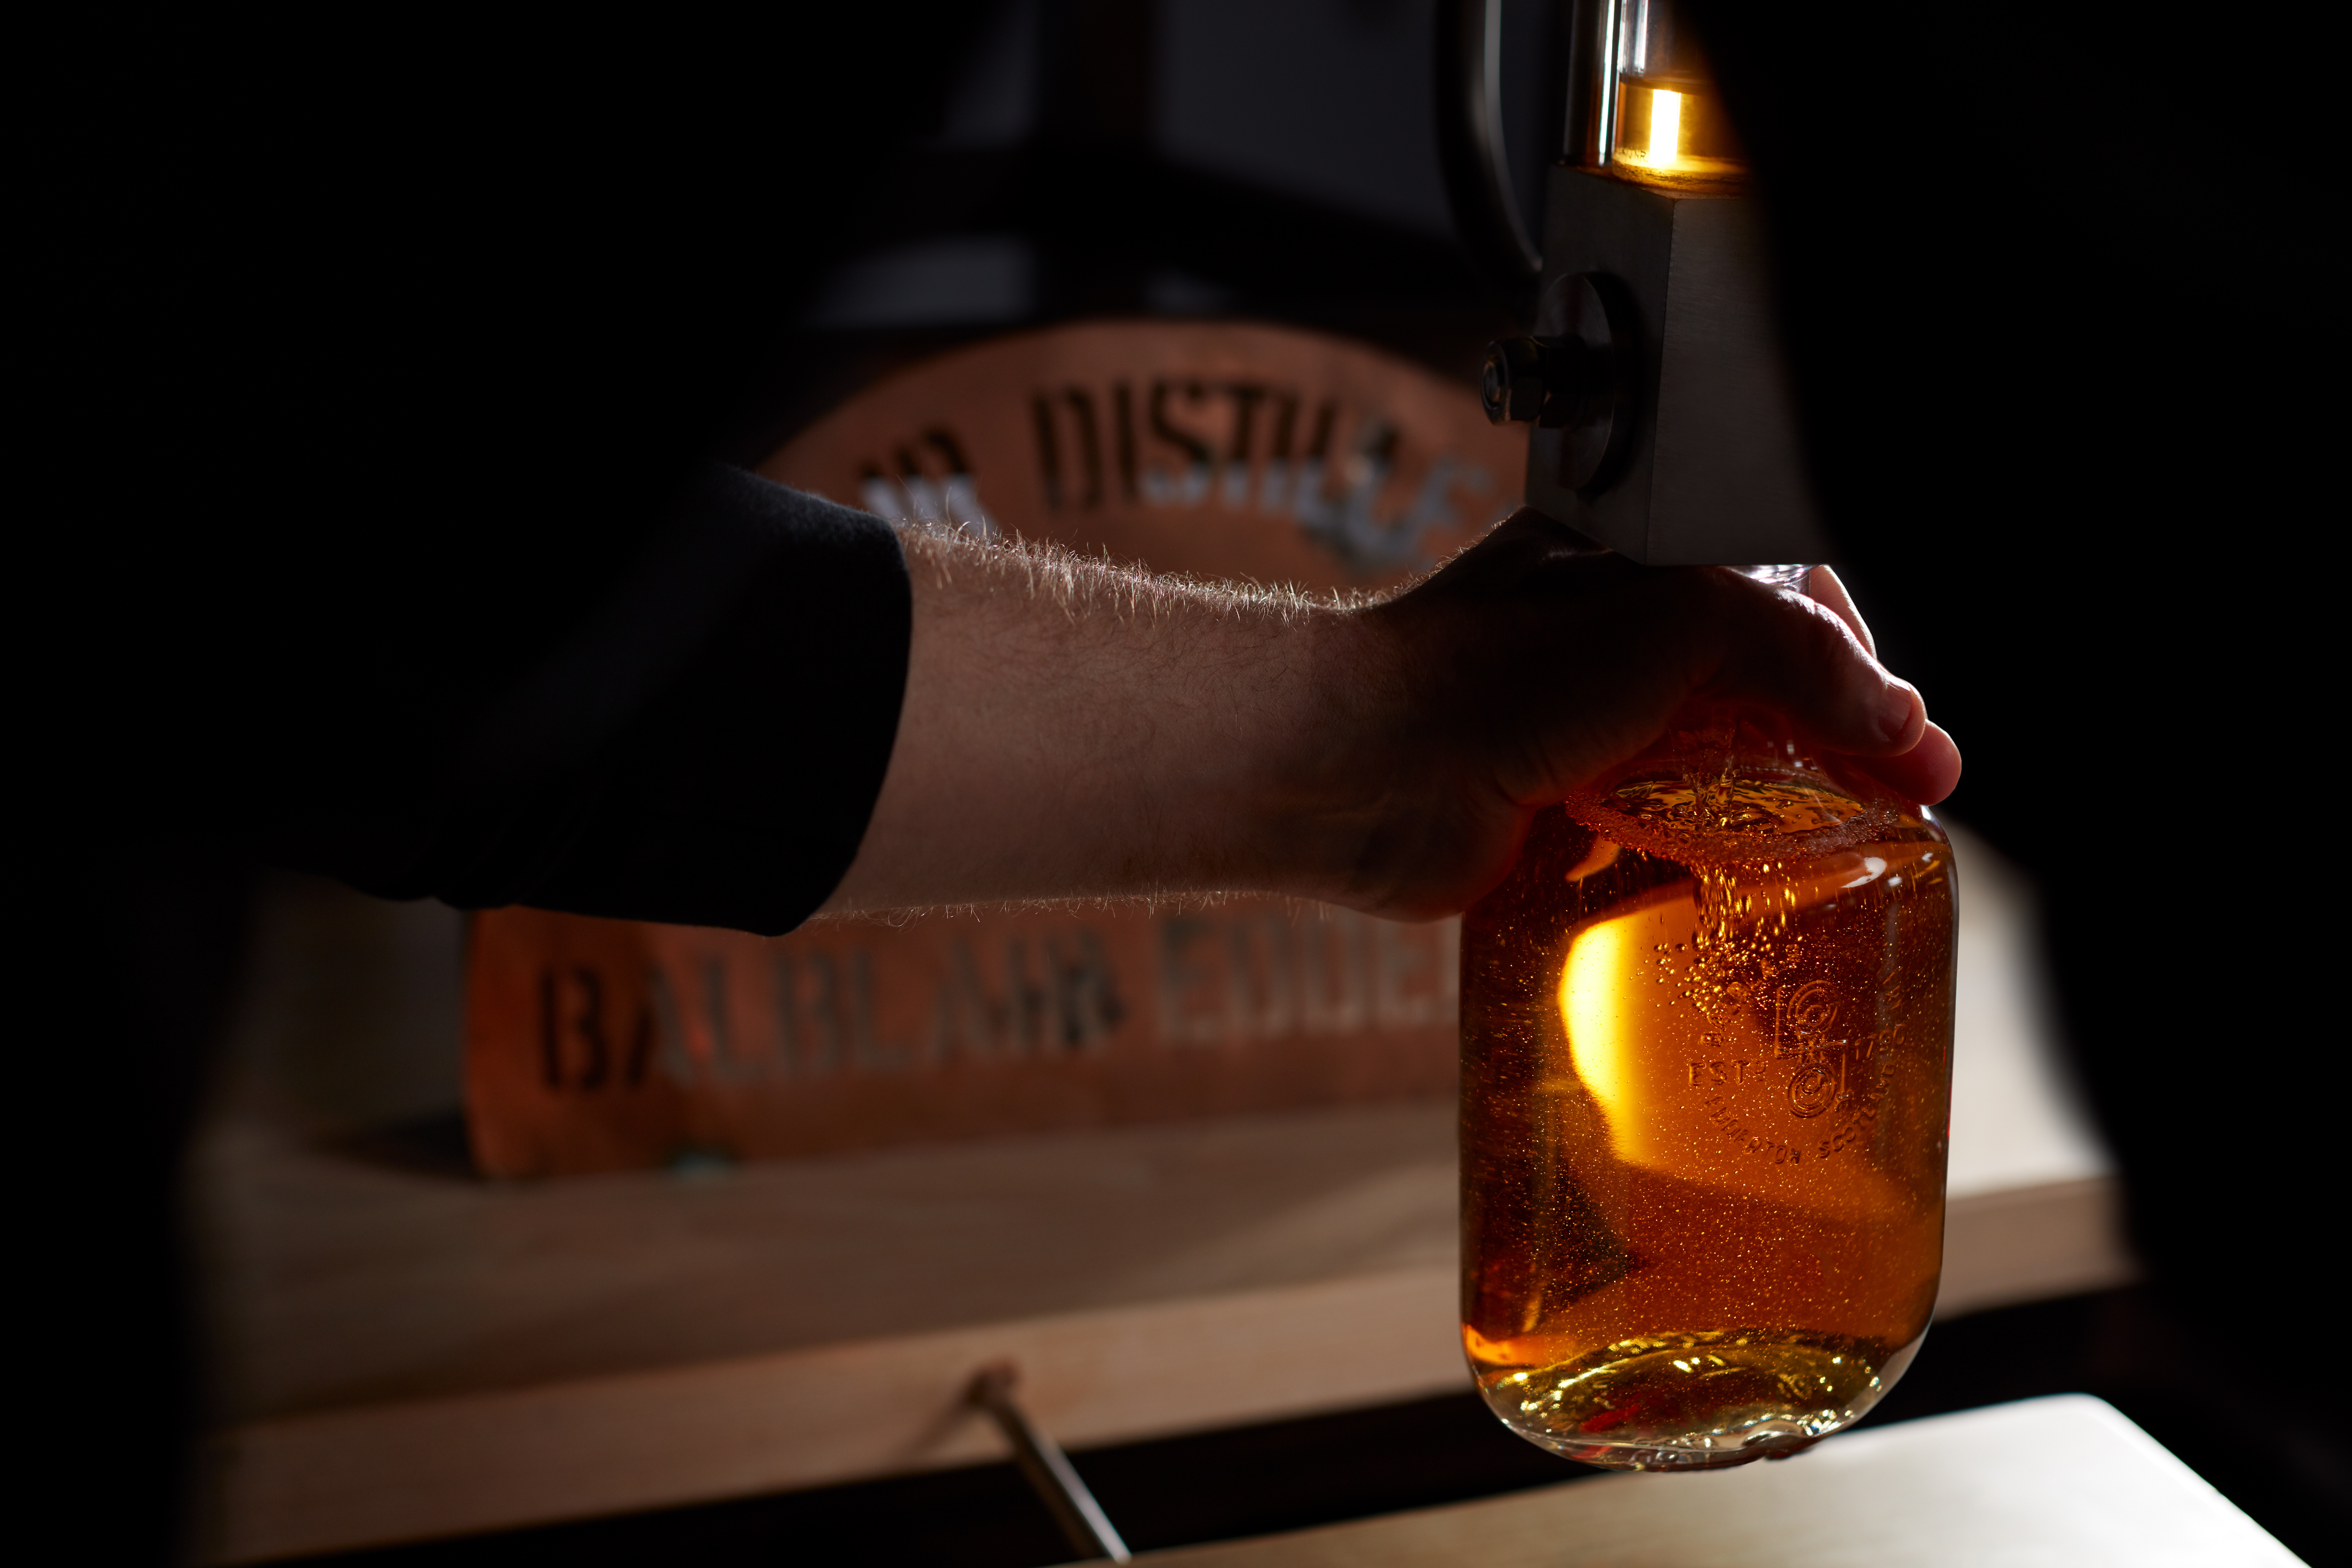 Balblair Whisky hand bottle - we welcome visitors to buy a bottle from a hand-selected cask which you can fill, cork, seal and label yourself.